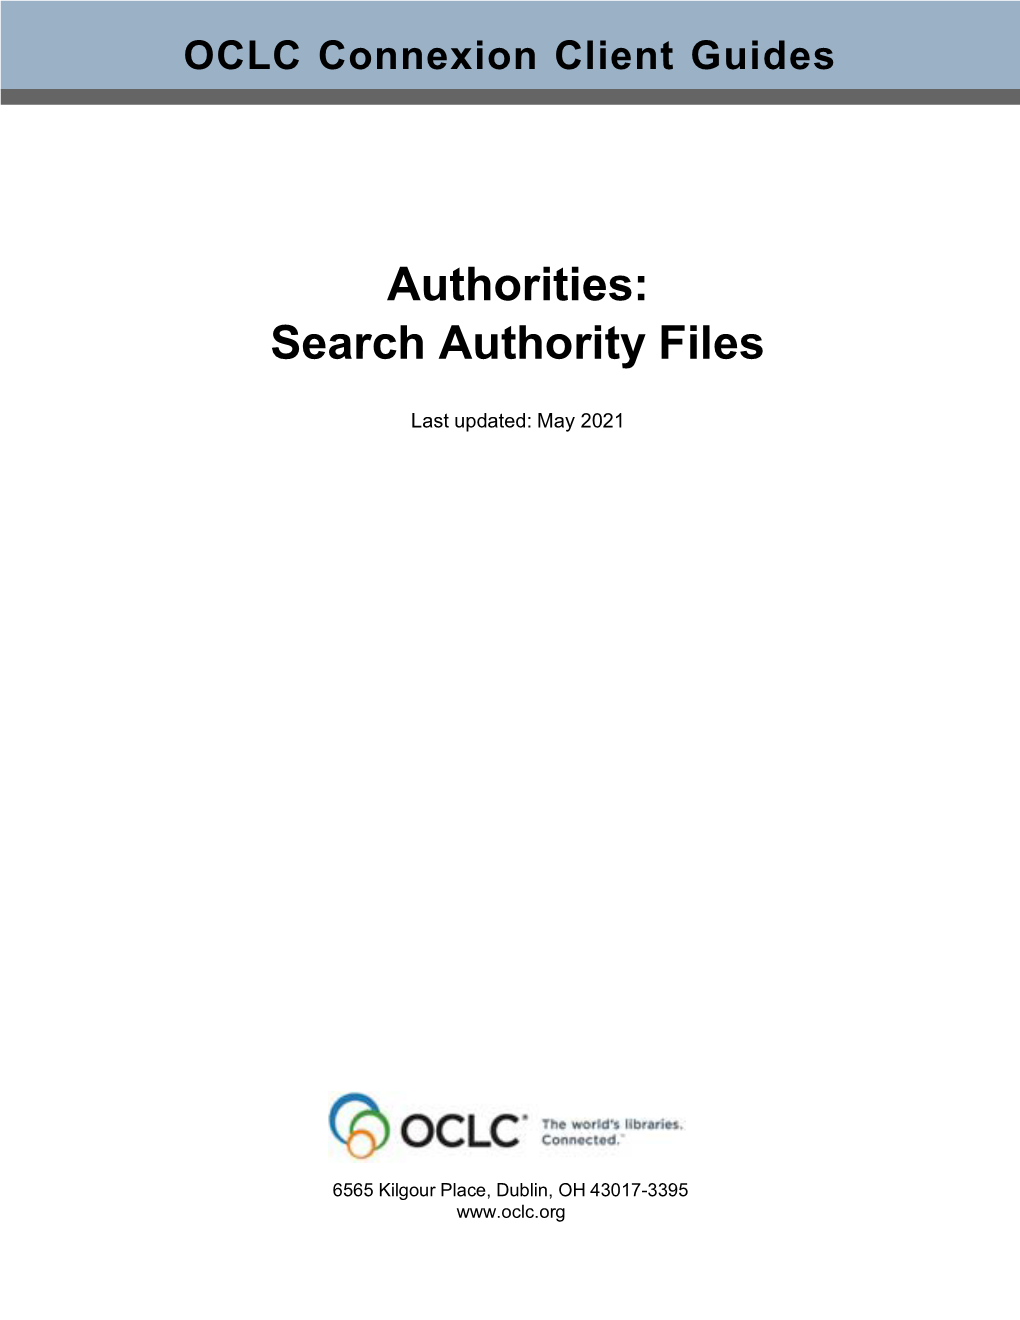 Search Authority Files